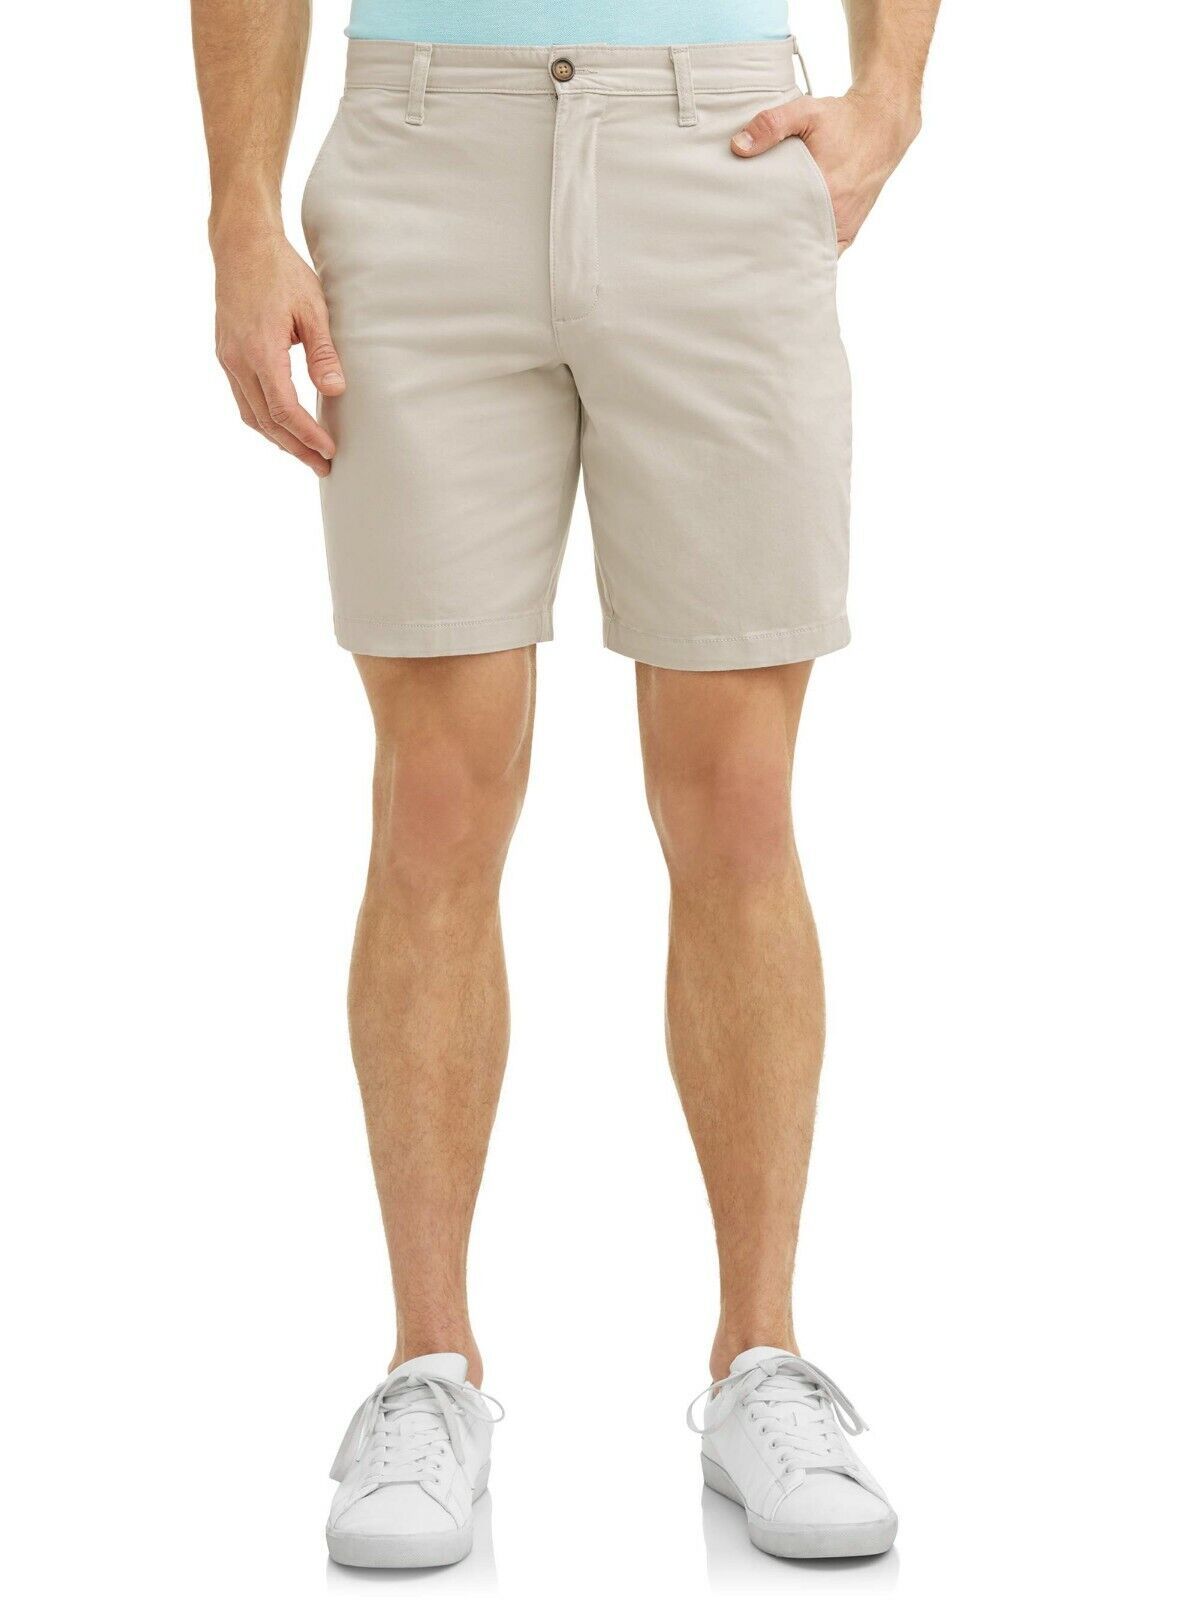 Primary image for George Men's Casual Flat Front Shorts Size 44 Sidewalk Khaki   9" Inseam NEW